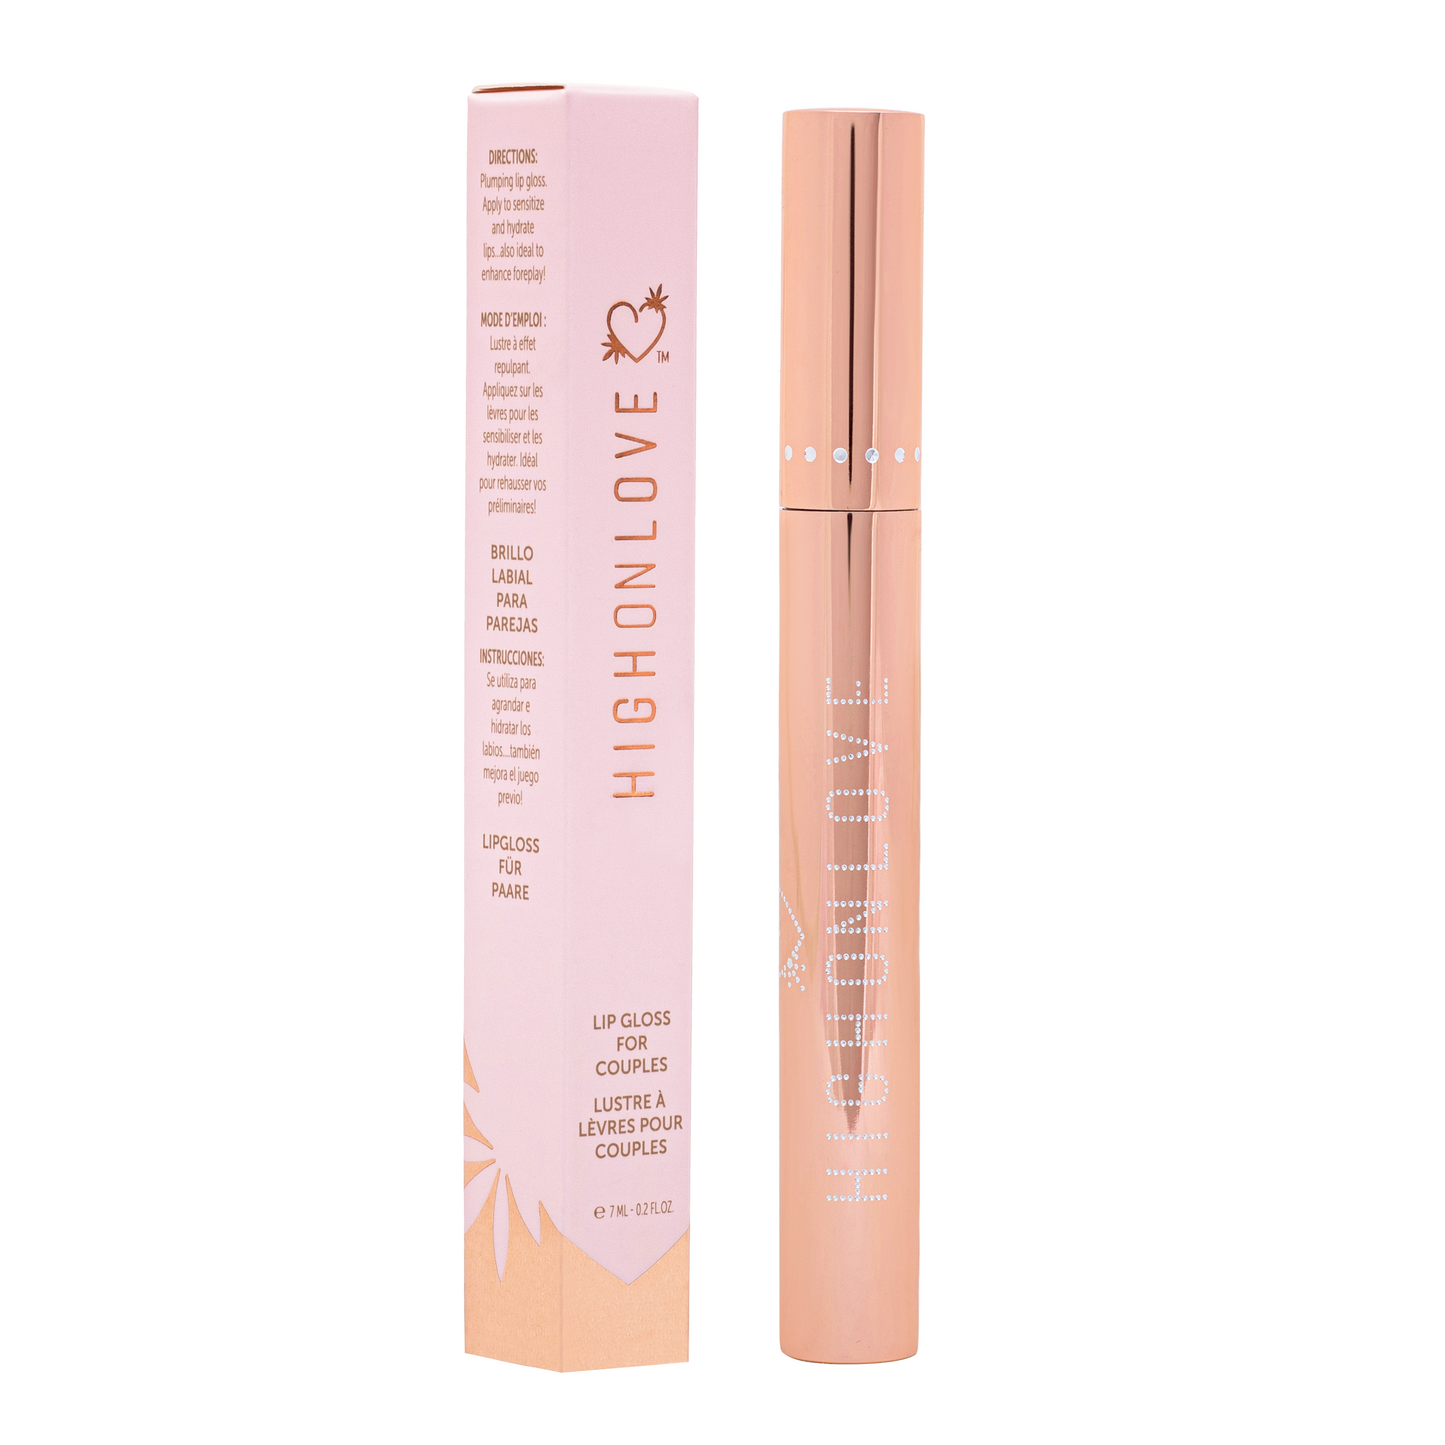 HighOnLove Couples Lip Gloss - One Stop Adult Shop